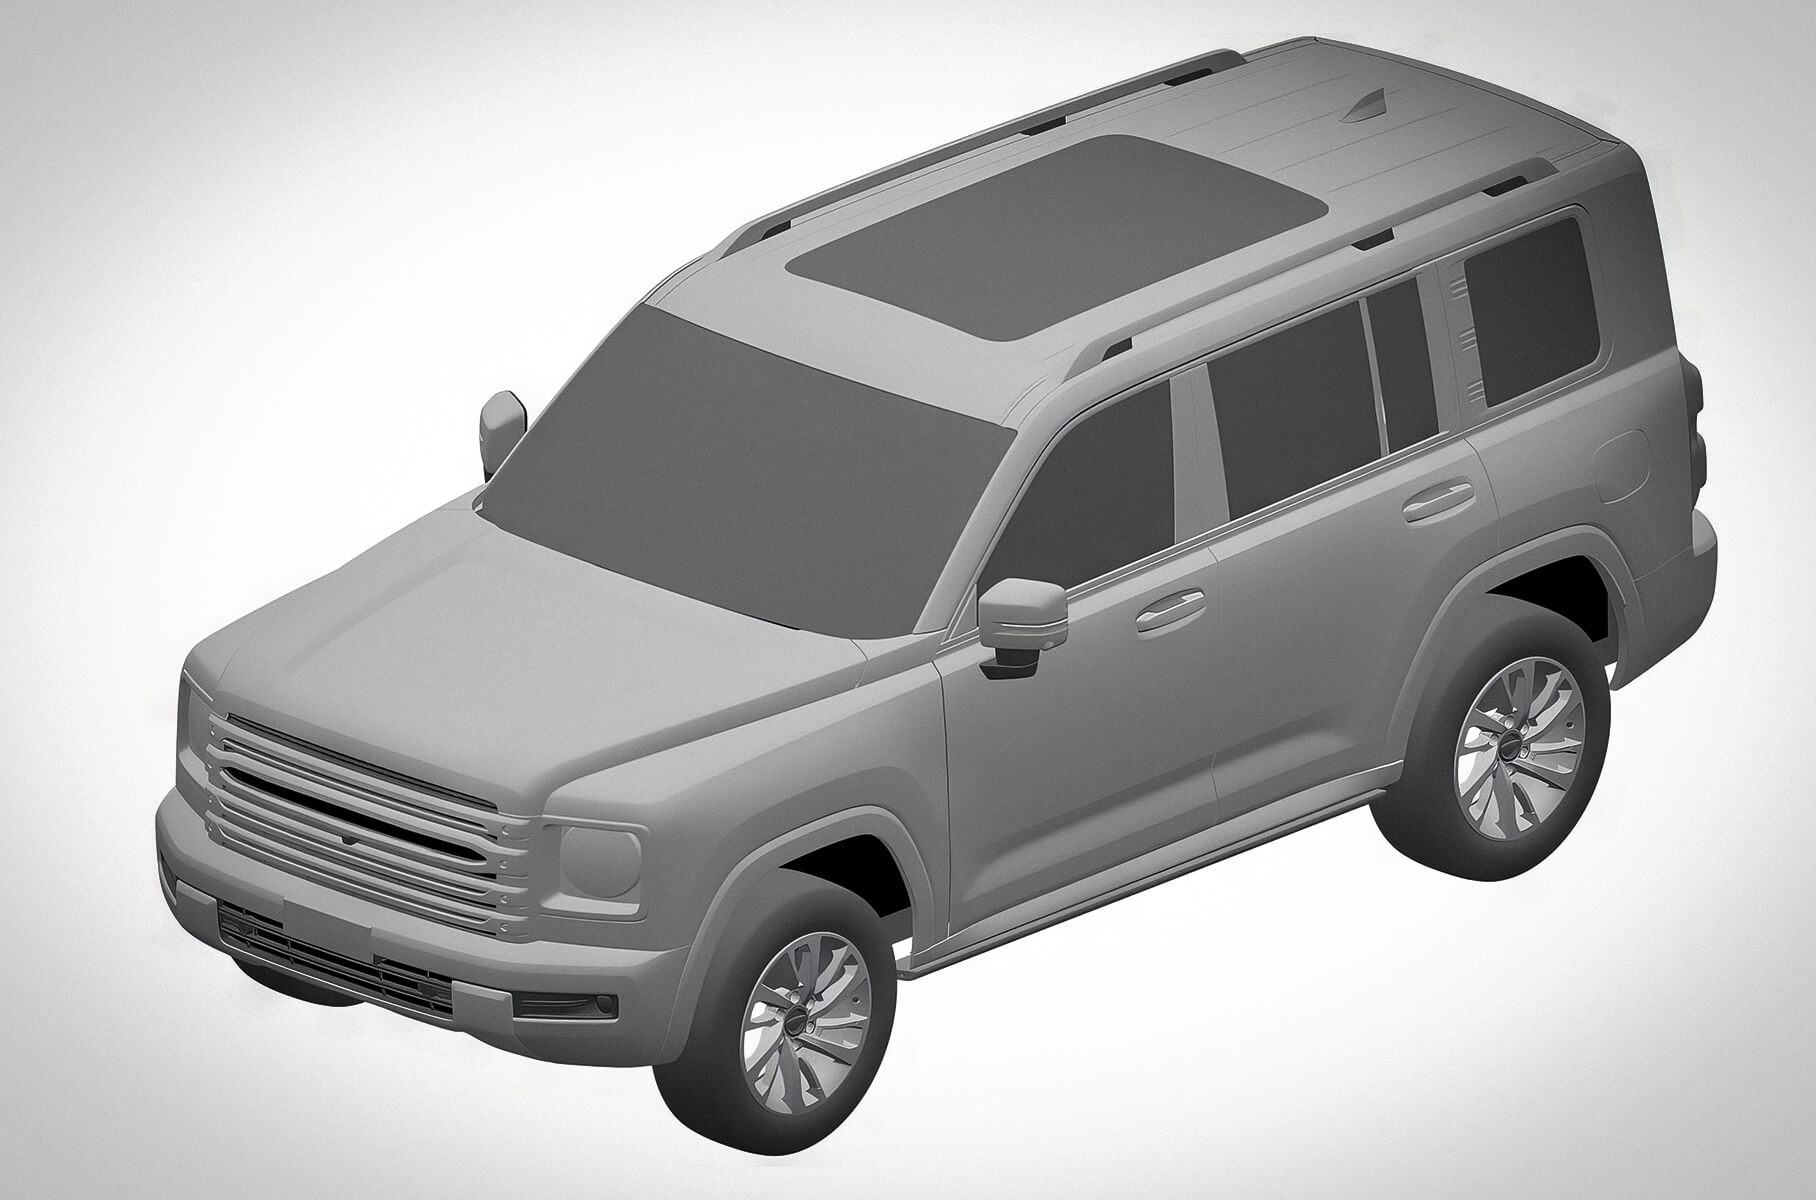 A new Haval frame SUV has been patented in Russia